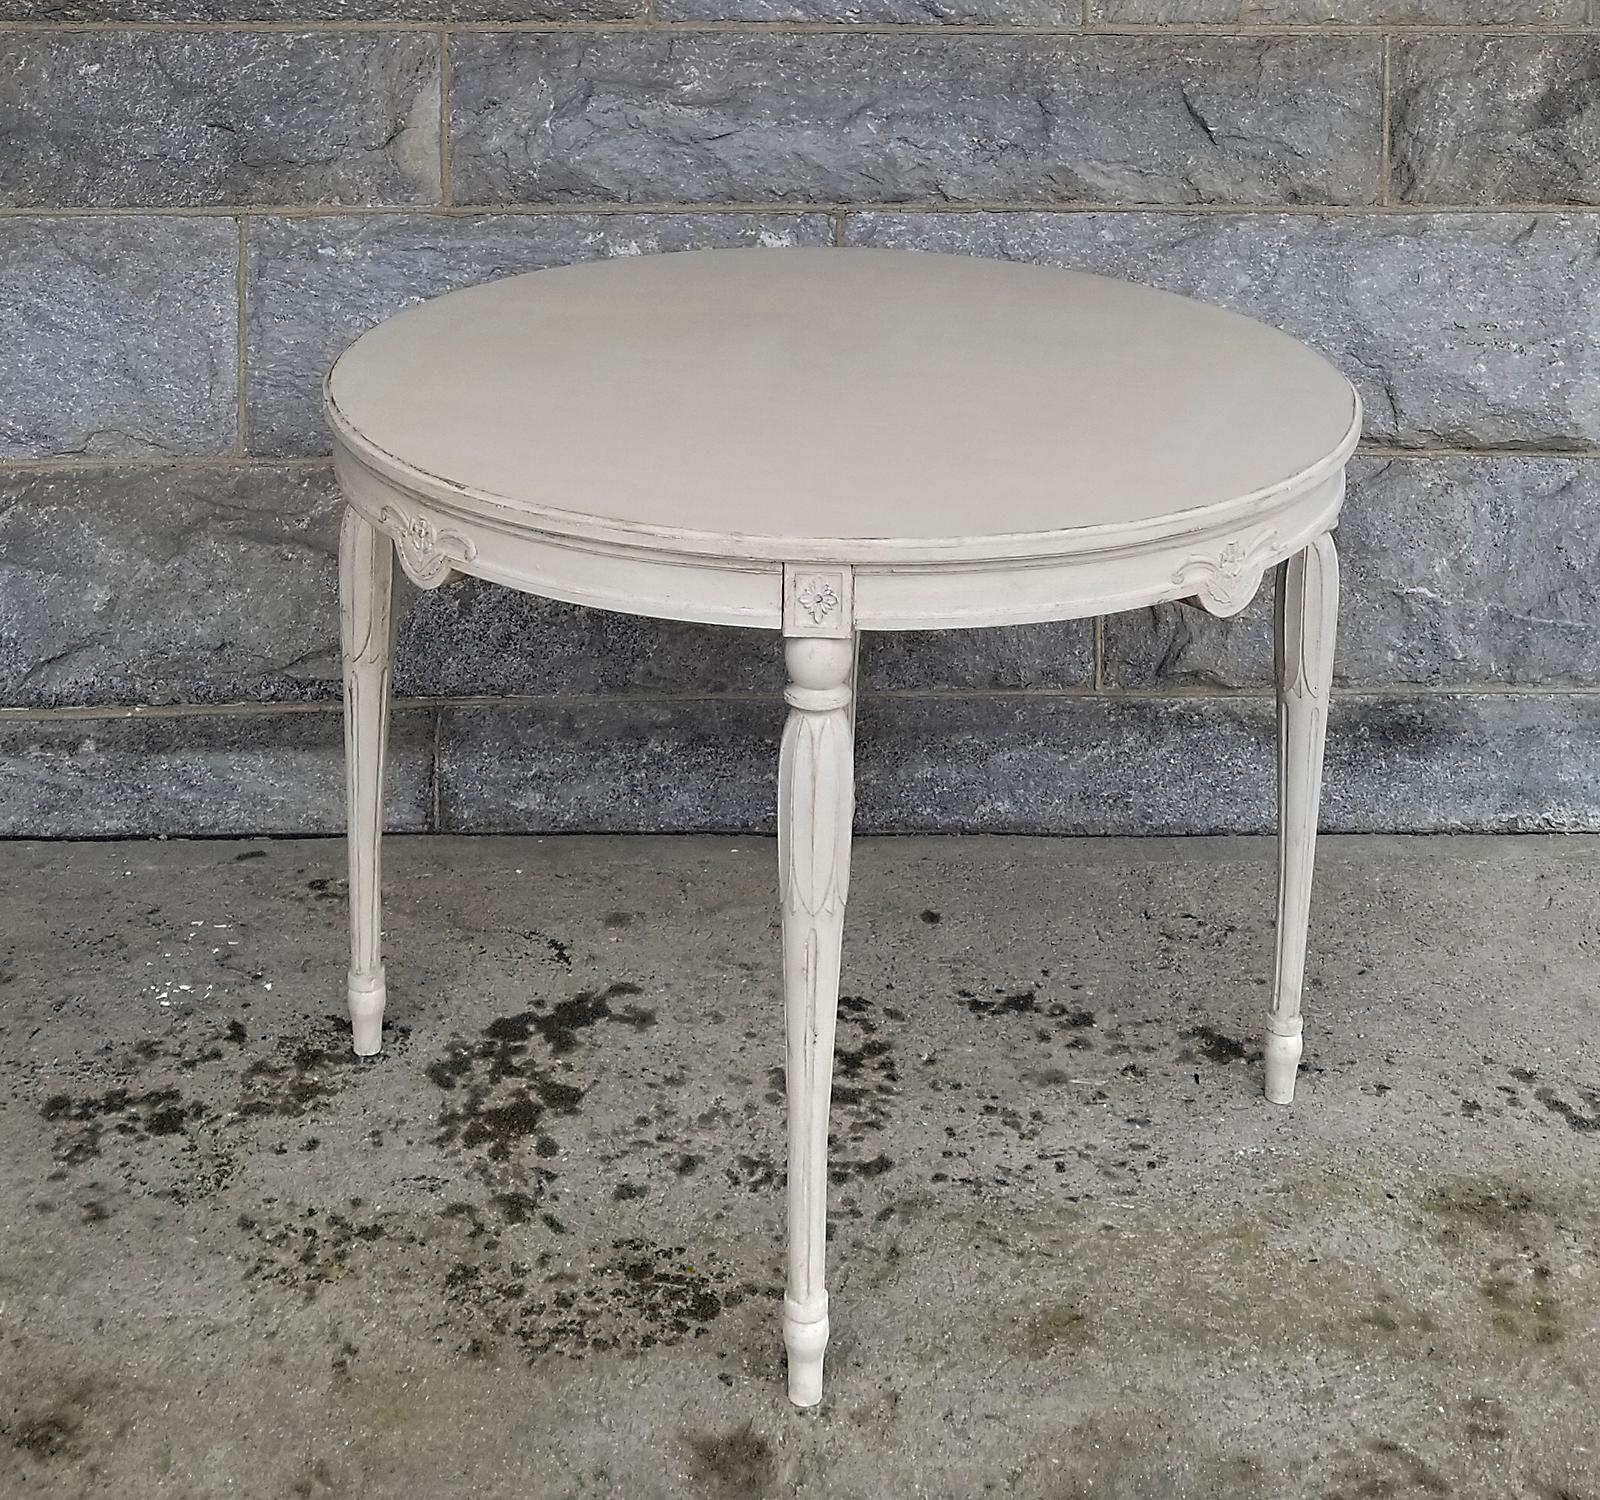 Swedish breakfast table in the Gustavian style, circa 1900. Carved floral details on the apron with laurel leaves and reeding on the tapering round legs. No repairs.